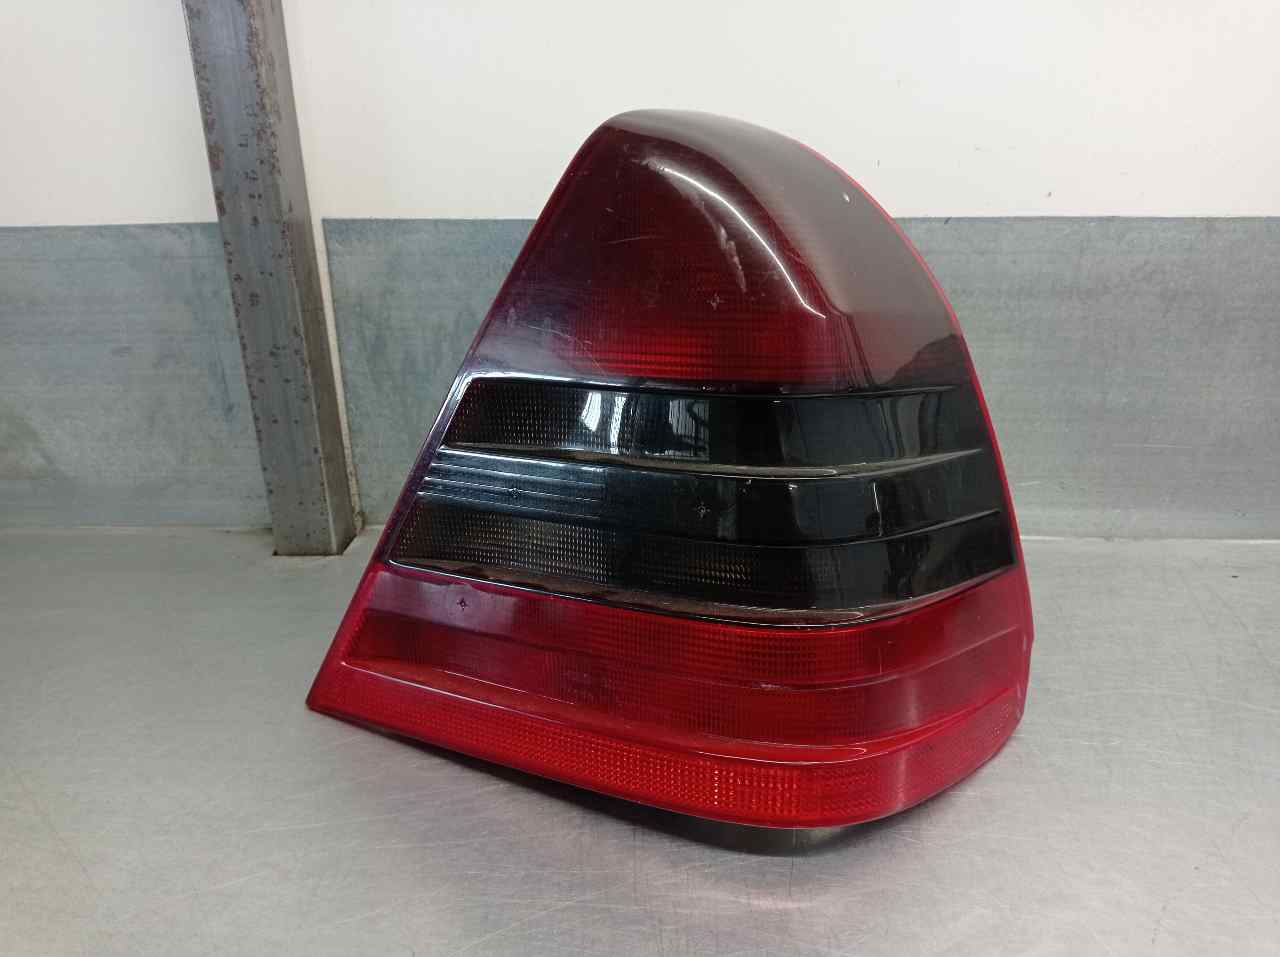 MERCEDES-BENZ C-Class W202/S202 (1993-2001) Rear Right Taillight Lamp 2028203664, 4PUERTAS 21721553